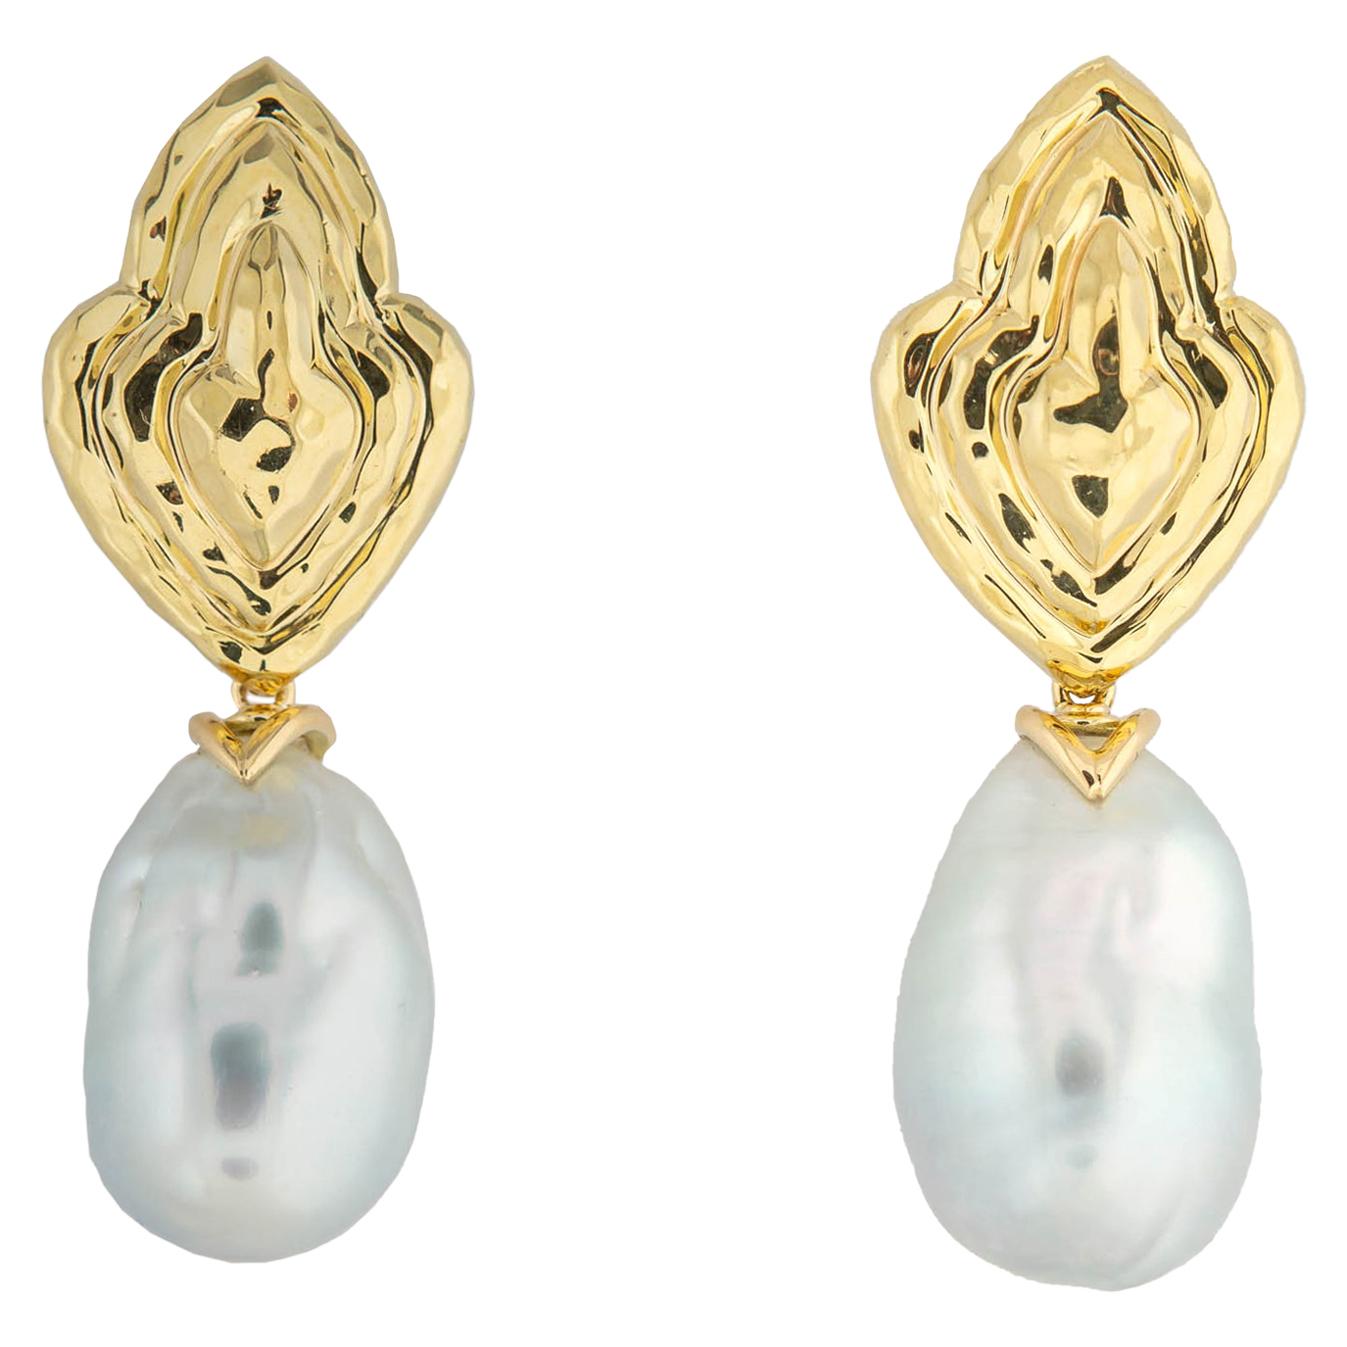 Henry Dunay Gold and South Sea Pearl Drop Earrings